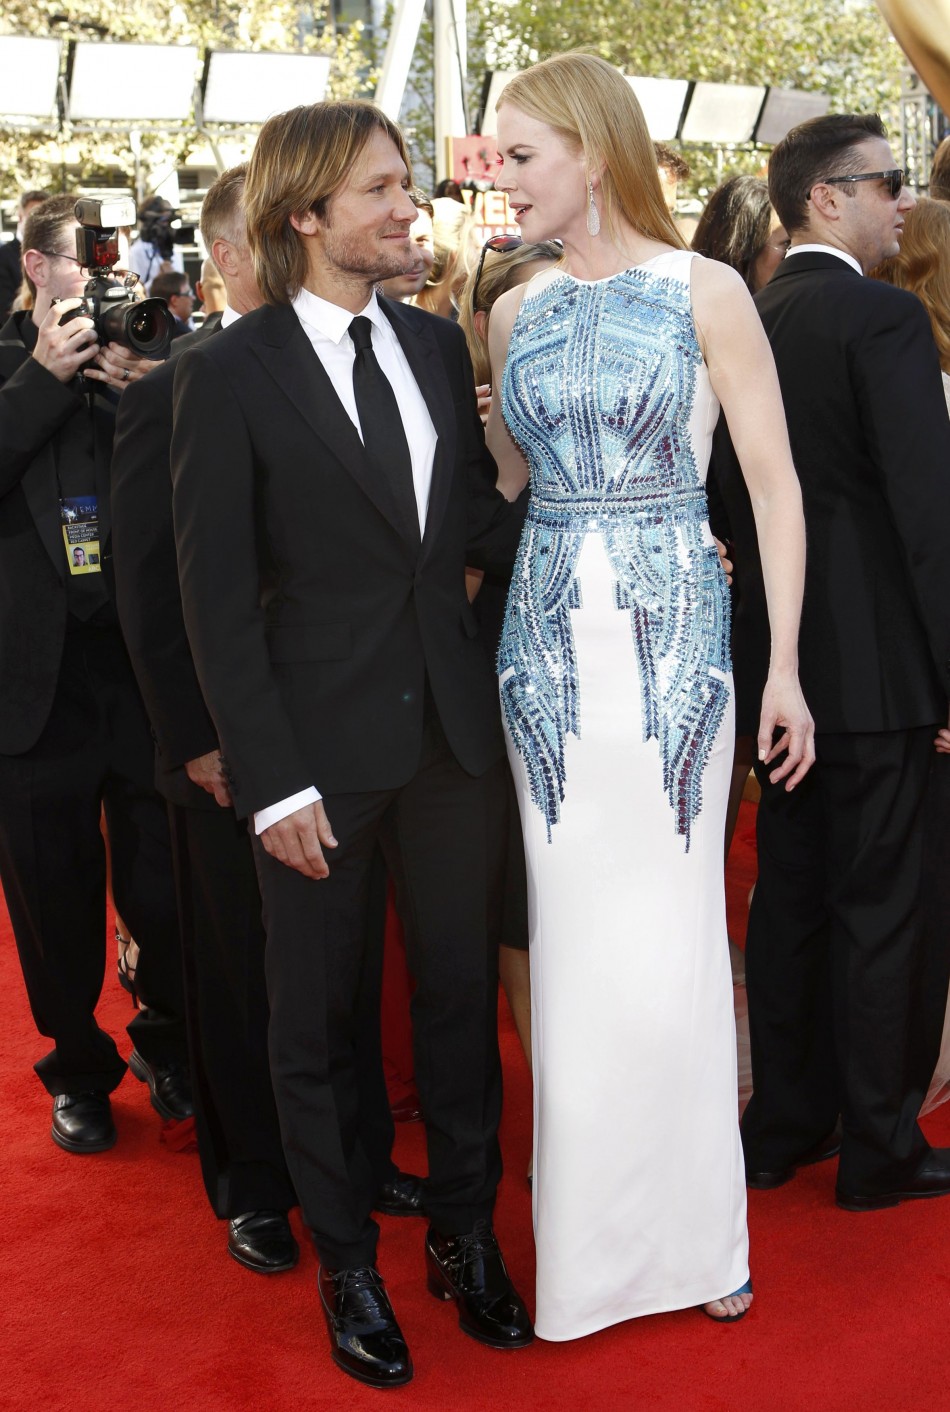 Country singer Keith Urban and his wife, actress Nicole Kidman, arrive at the 64th Primetime Emmy Awards in Los Angeles